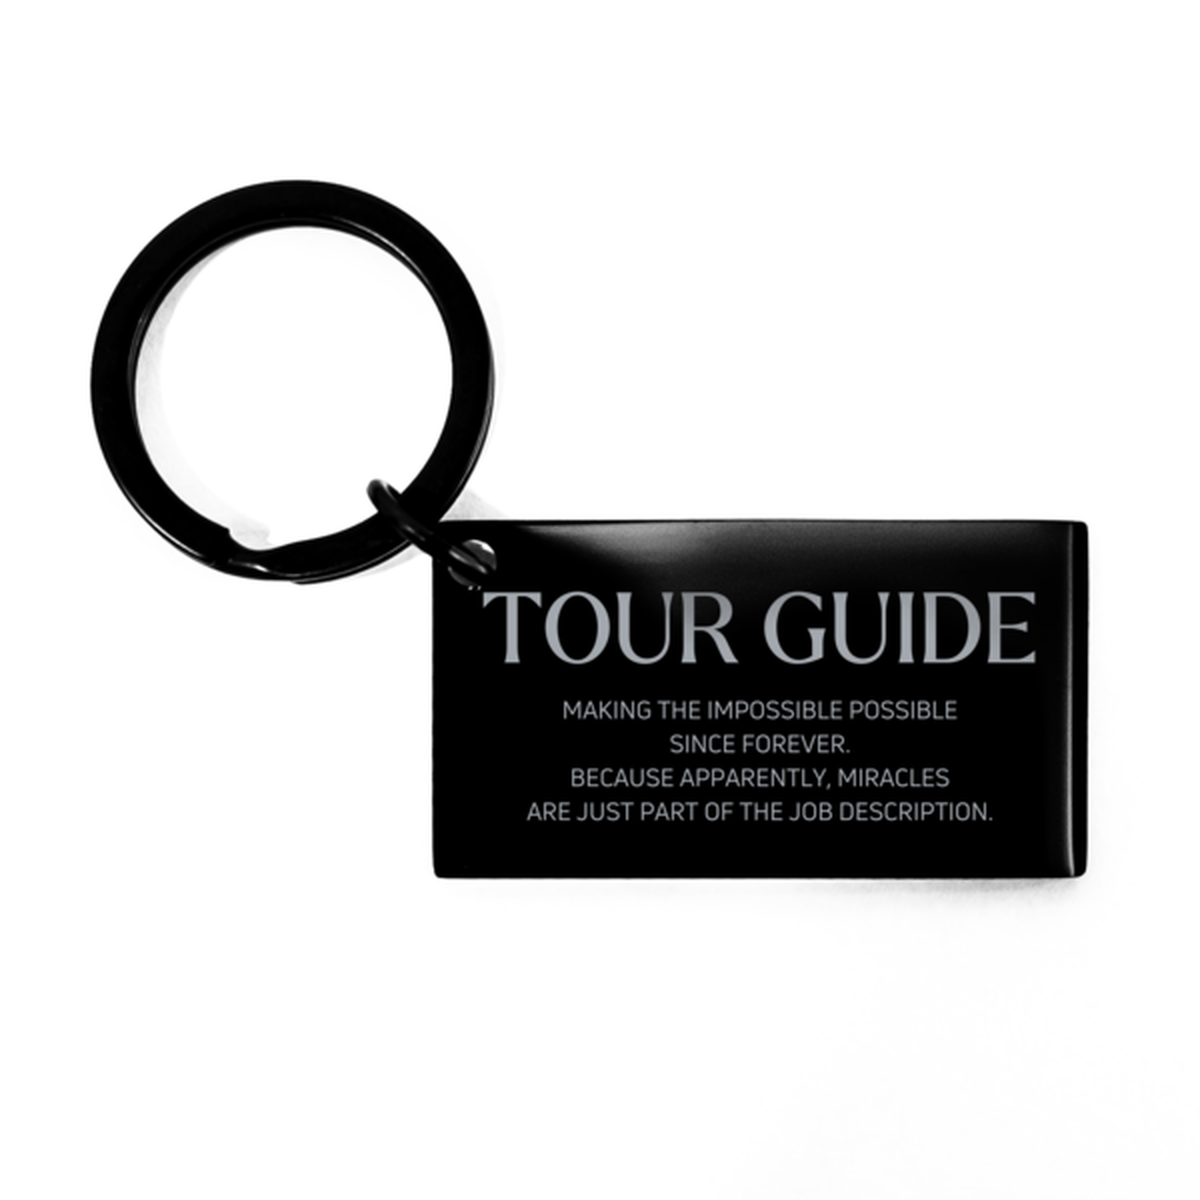 Funny Tour Guide Gifts, Miracles are just part of the job description, Inspirational Birthday Keychain For Tour Guide, Men, Women, Coworkers, Friends, Boss